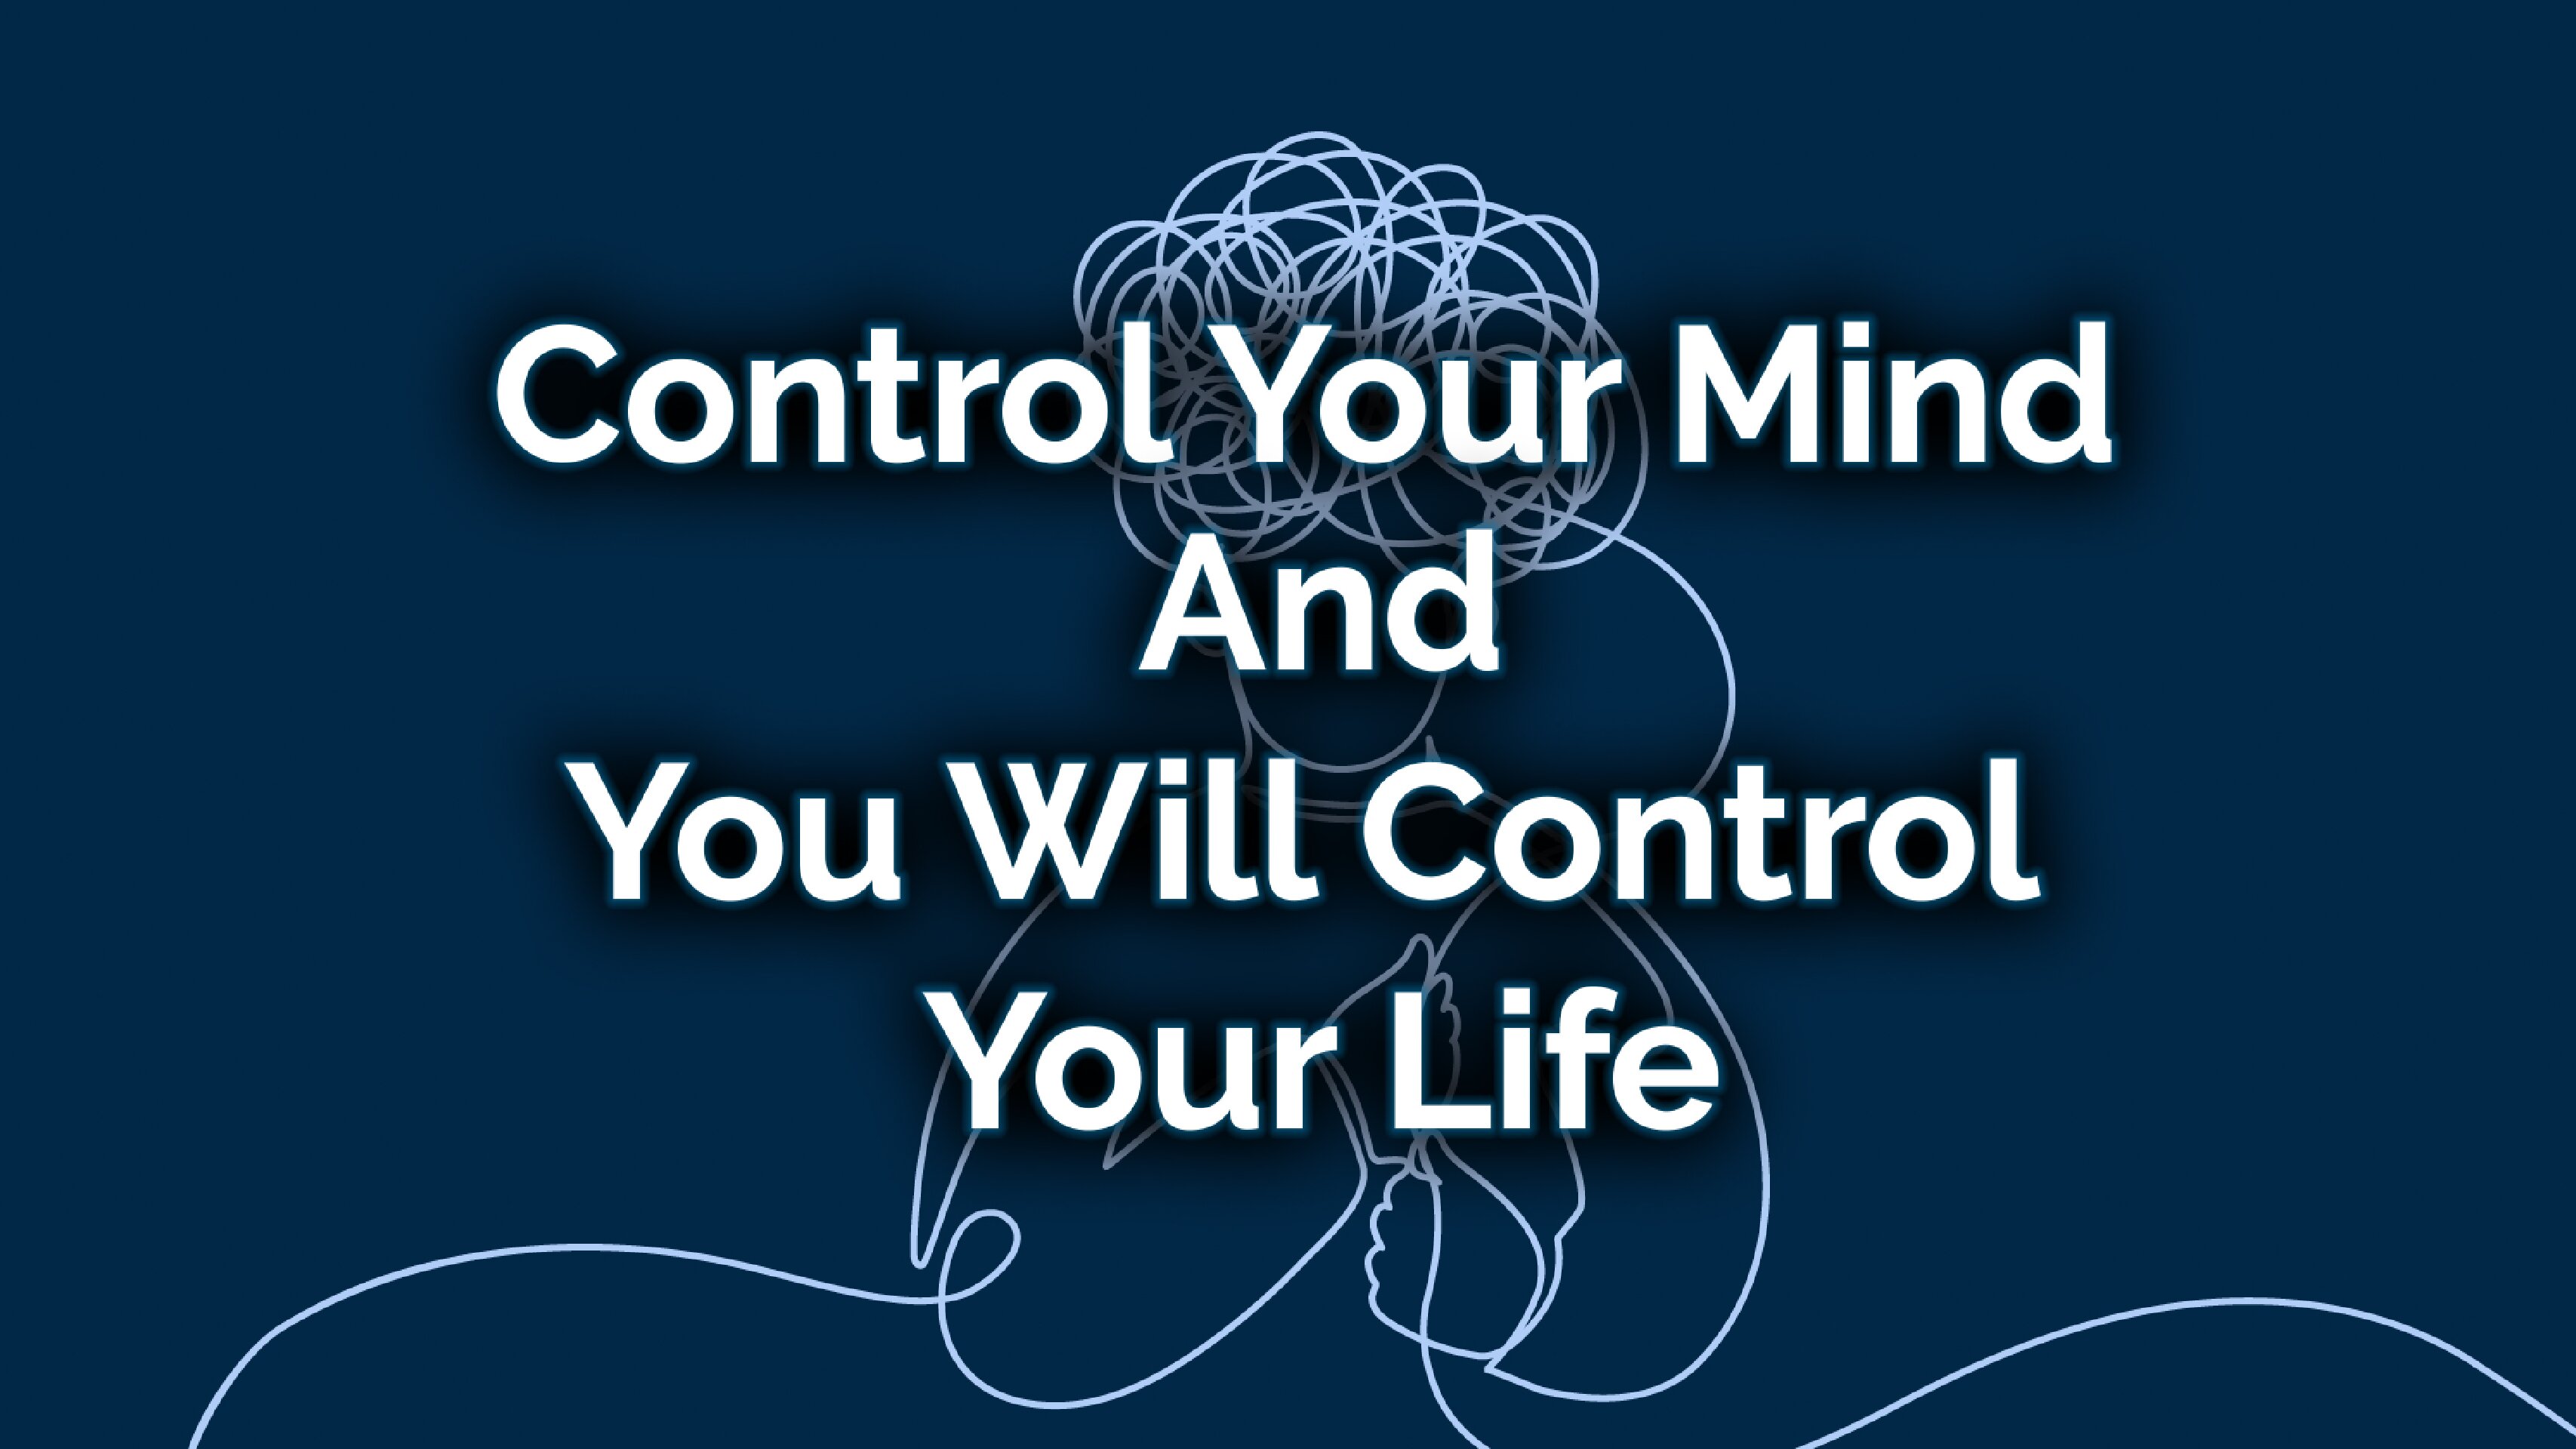 Control Your Mind and You will Control Your Life